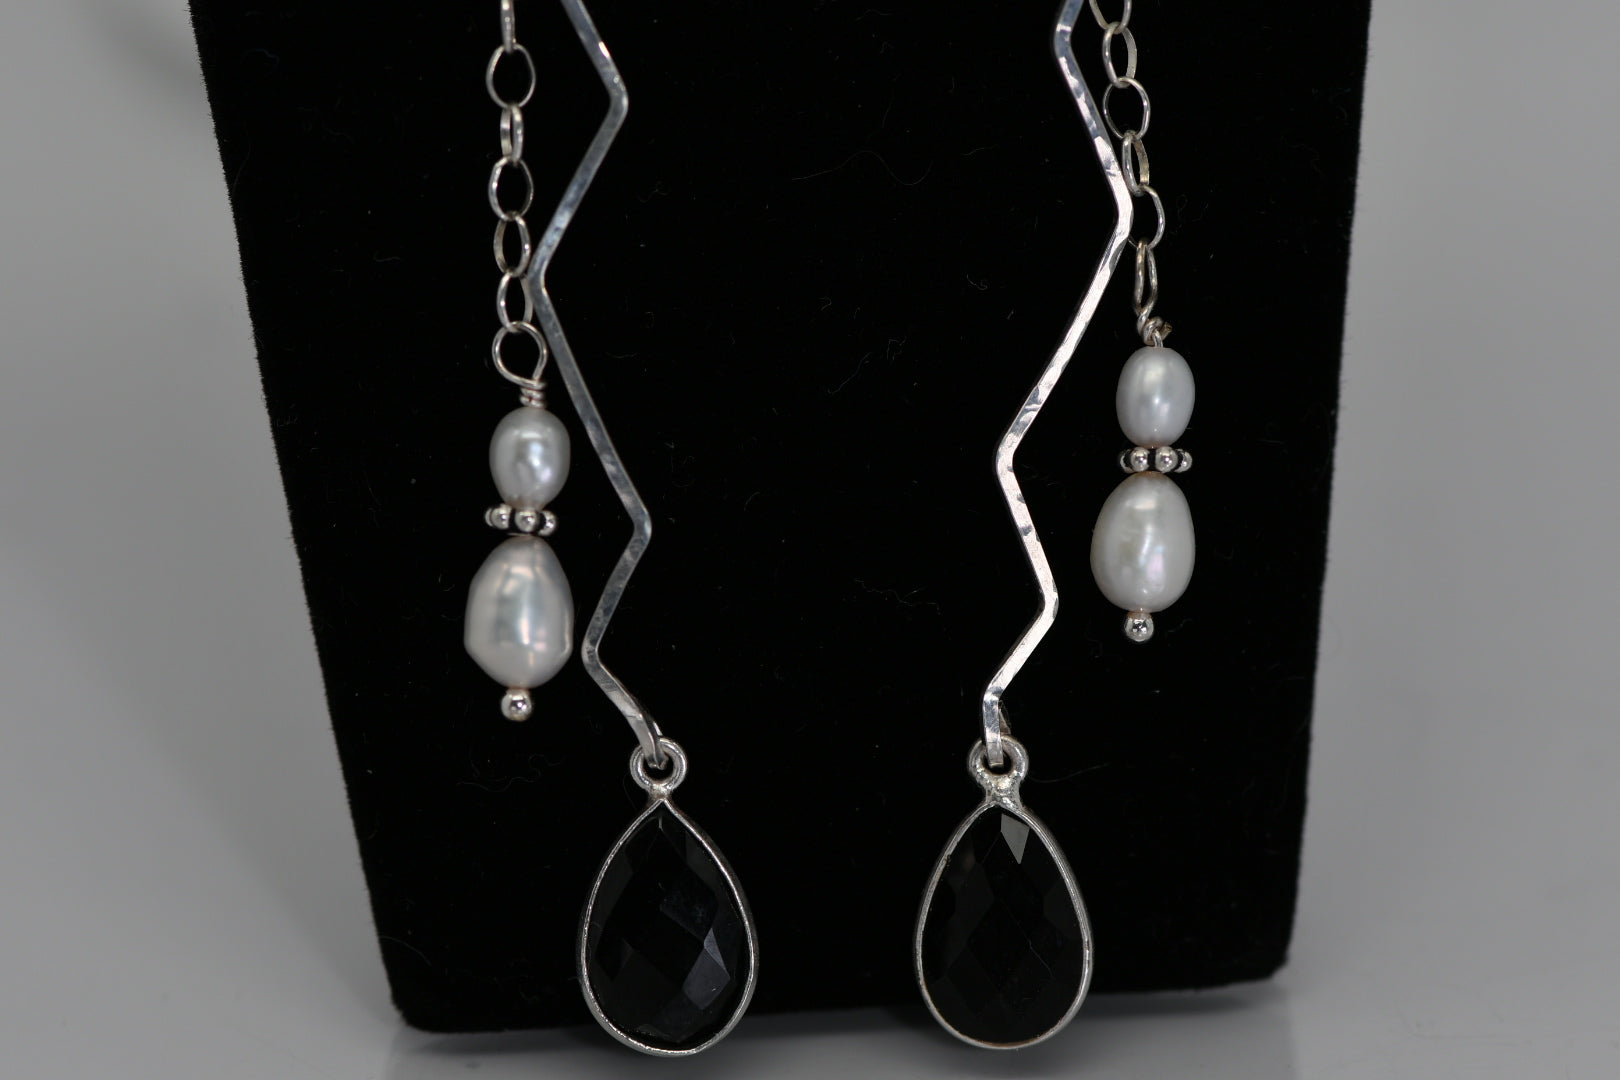 Hammered sterling silver earrings with pearls and black faceted crystal